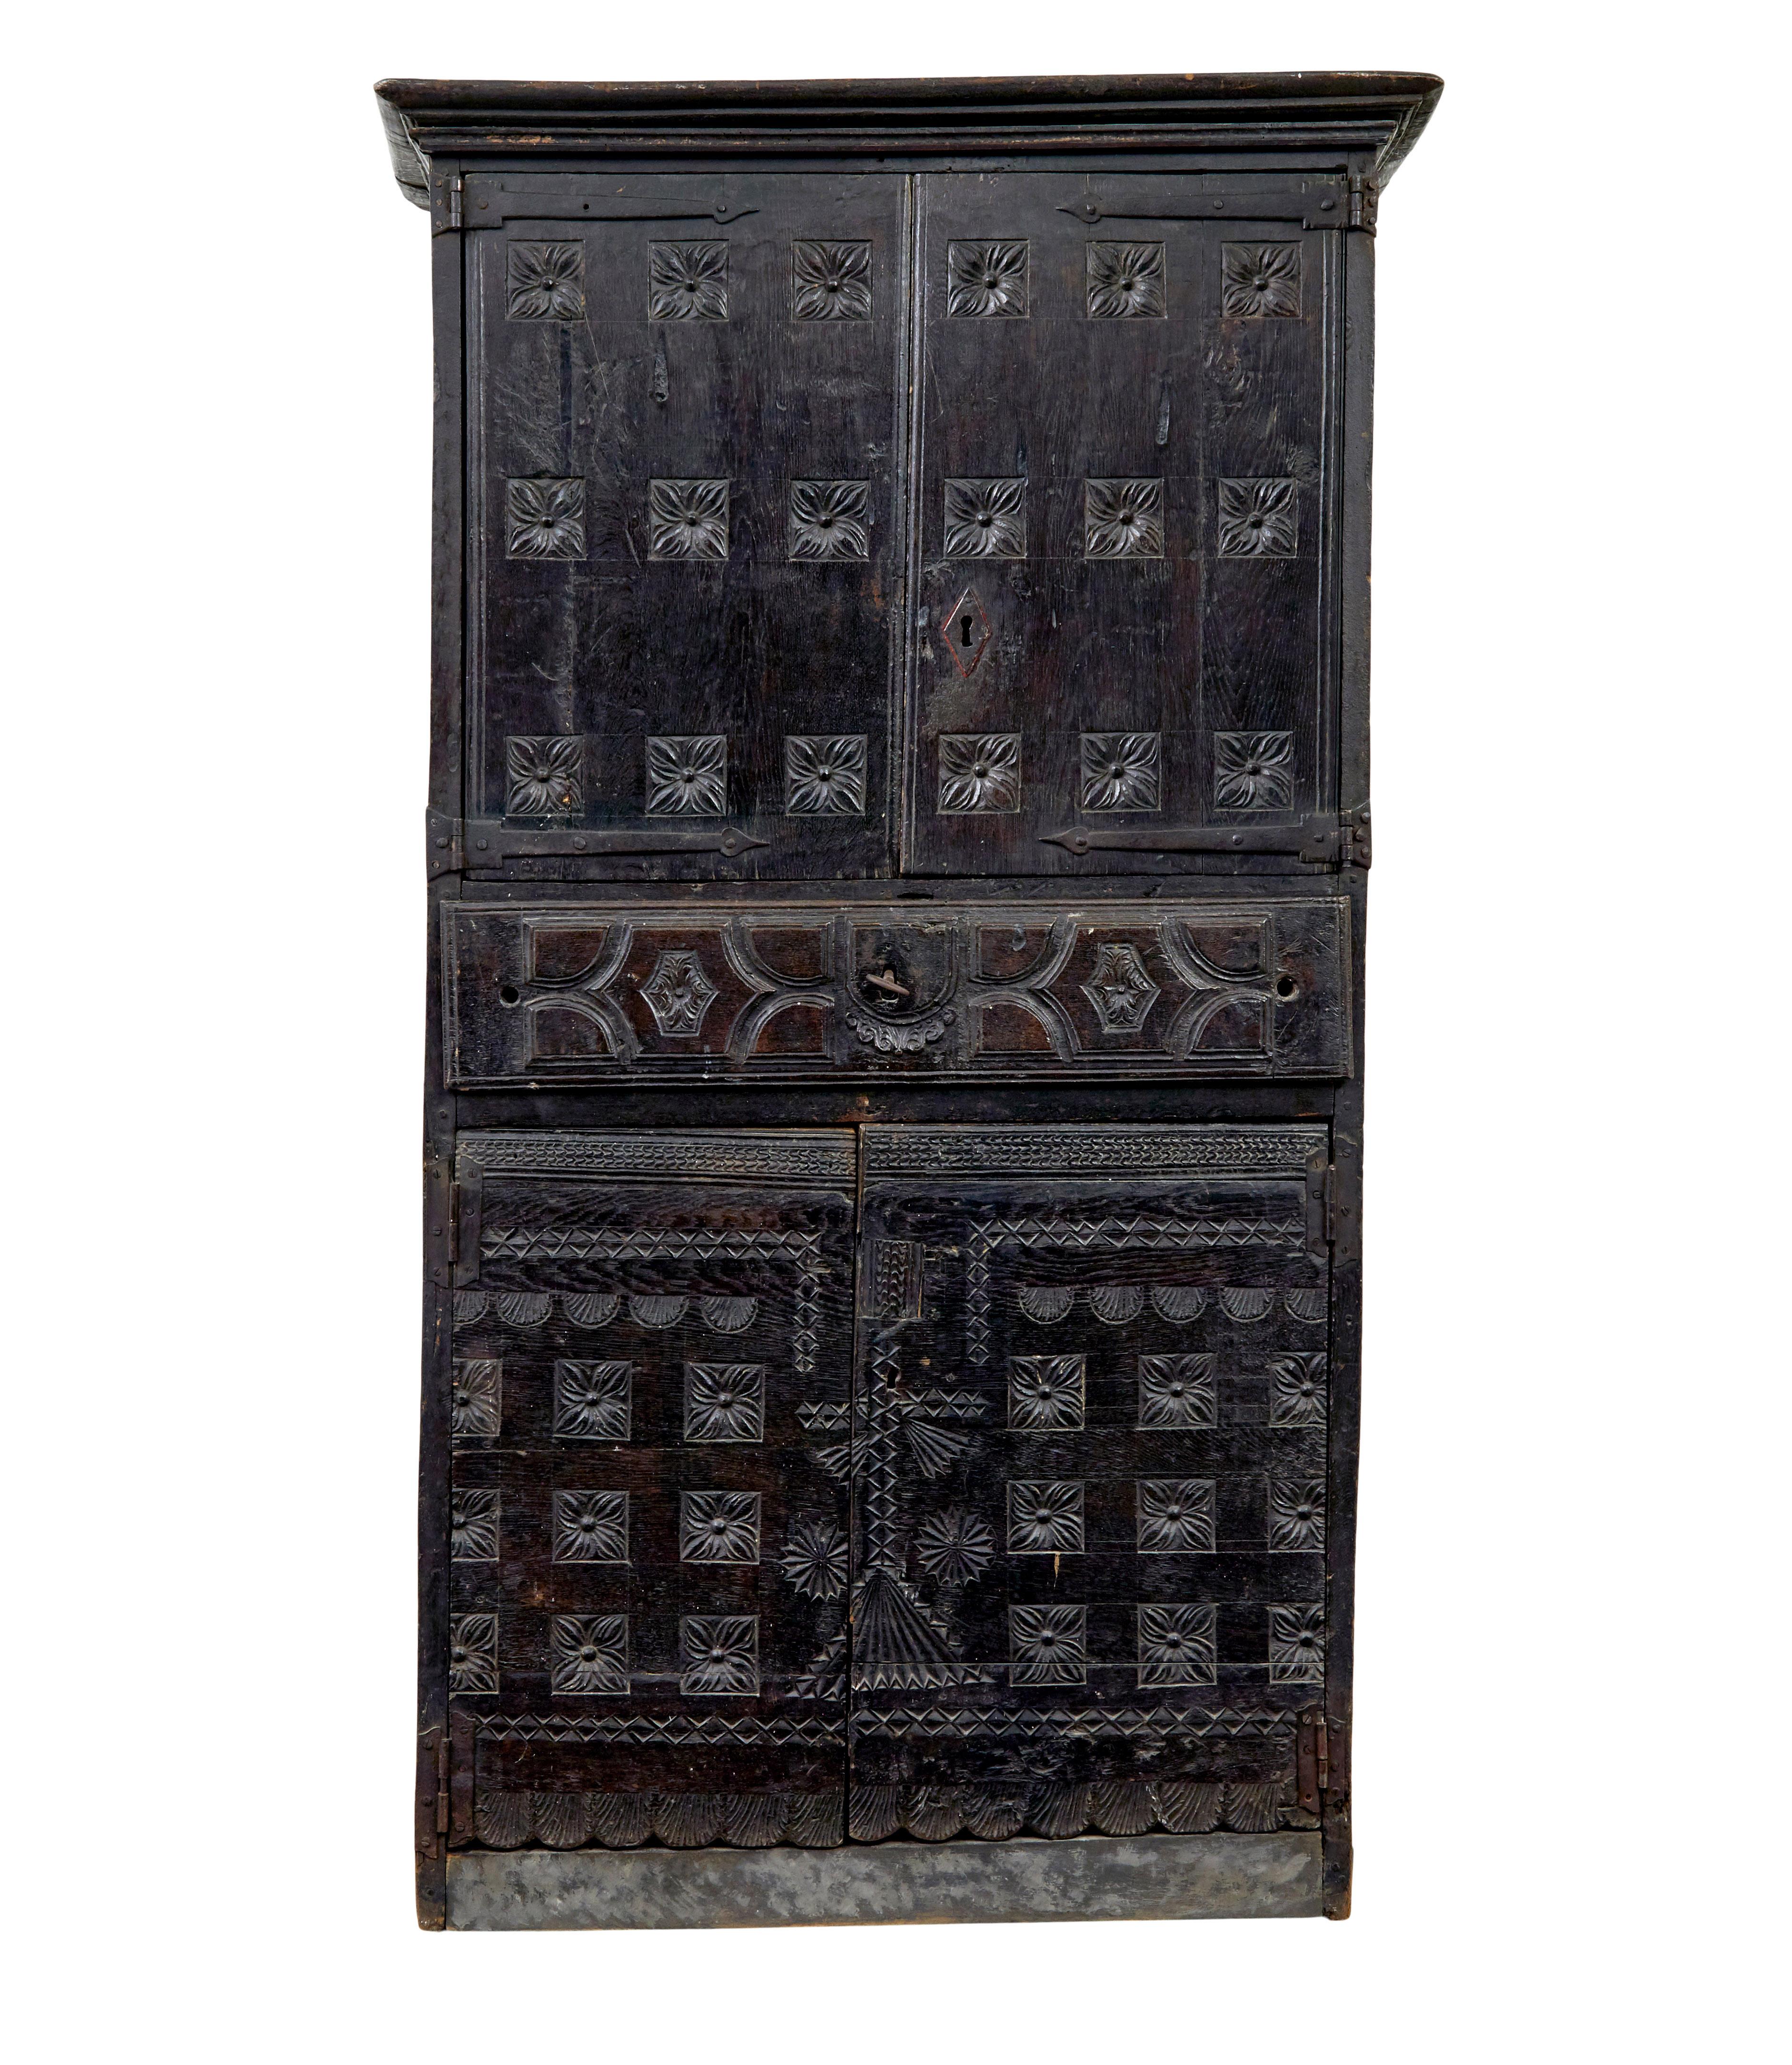 Early 19th century pyrenean folk art oak and chestnut cupboard circa 1800.

Beautiful rustic cupboard from the pyrenees region of the french spanish border.  Oak carcass with stunning carved chestnut doors and drawers.

Slightly over-sailing top